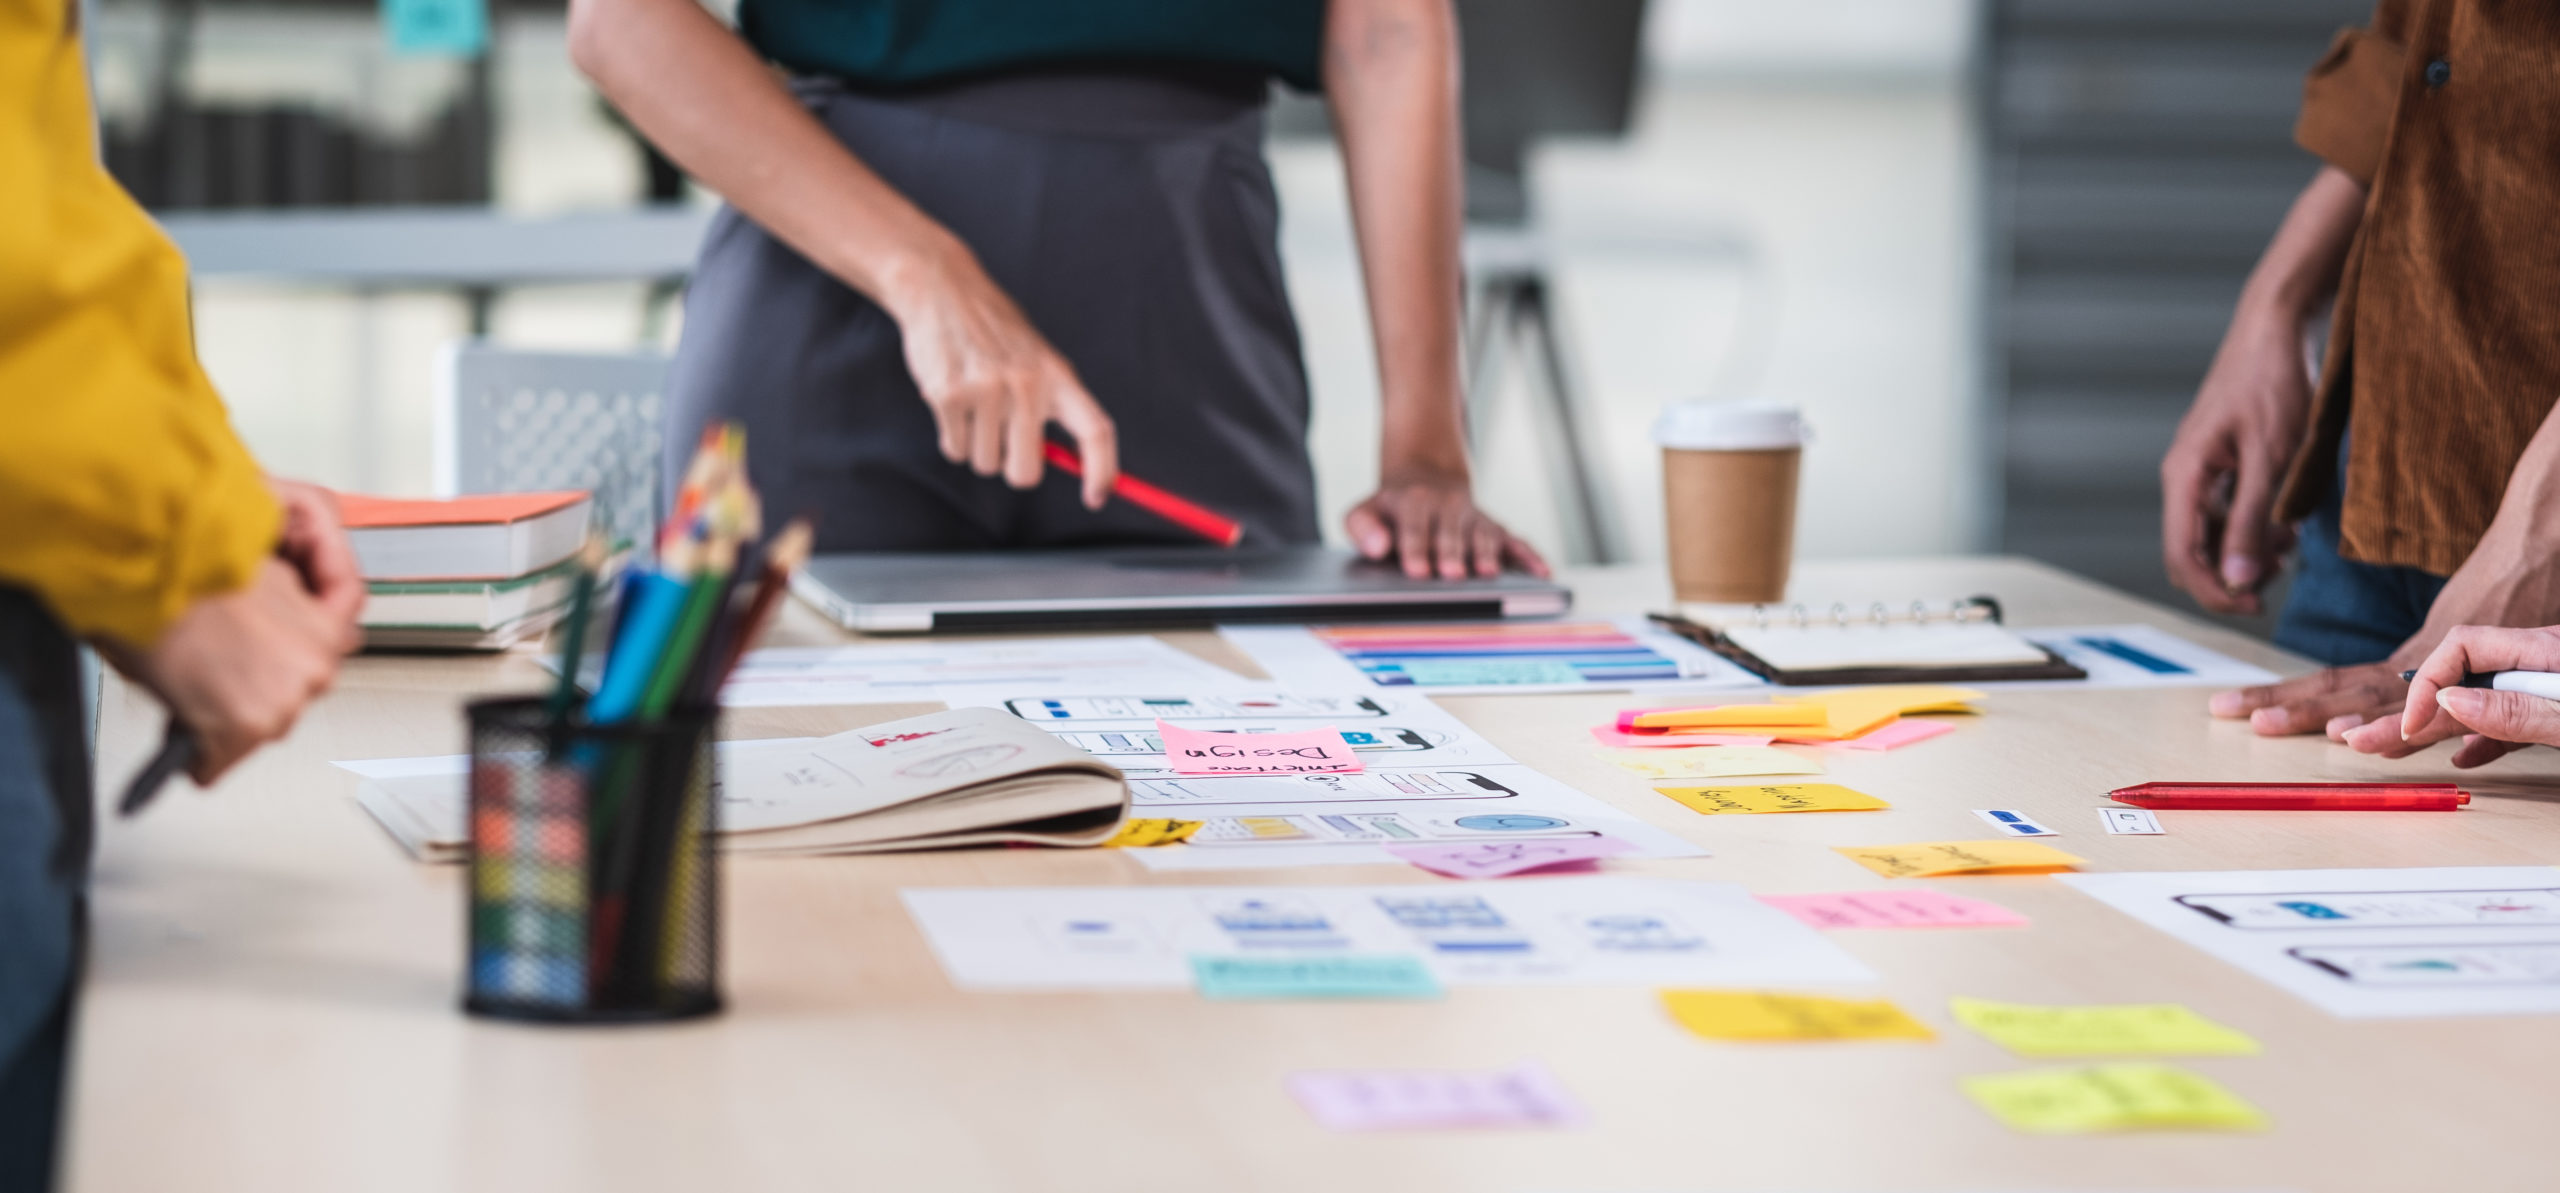 Close up ux developer and ui designer brainstorming about mobile app interface wireframe design on table with customer brief and color code at modern office.Creative digital development agency.panning